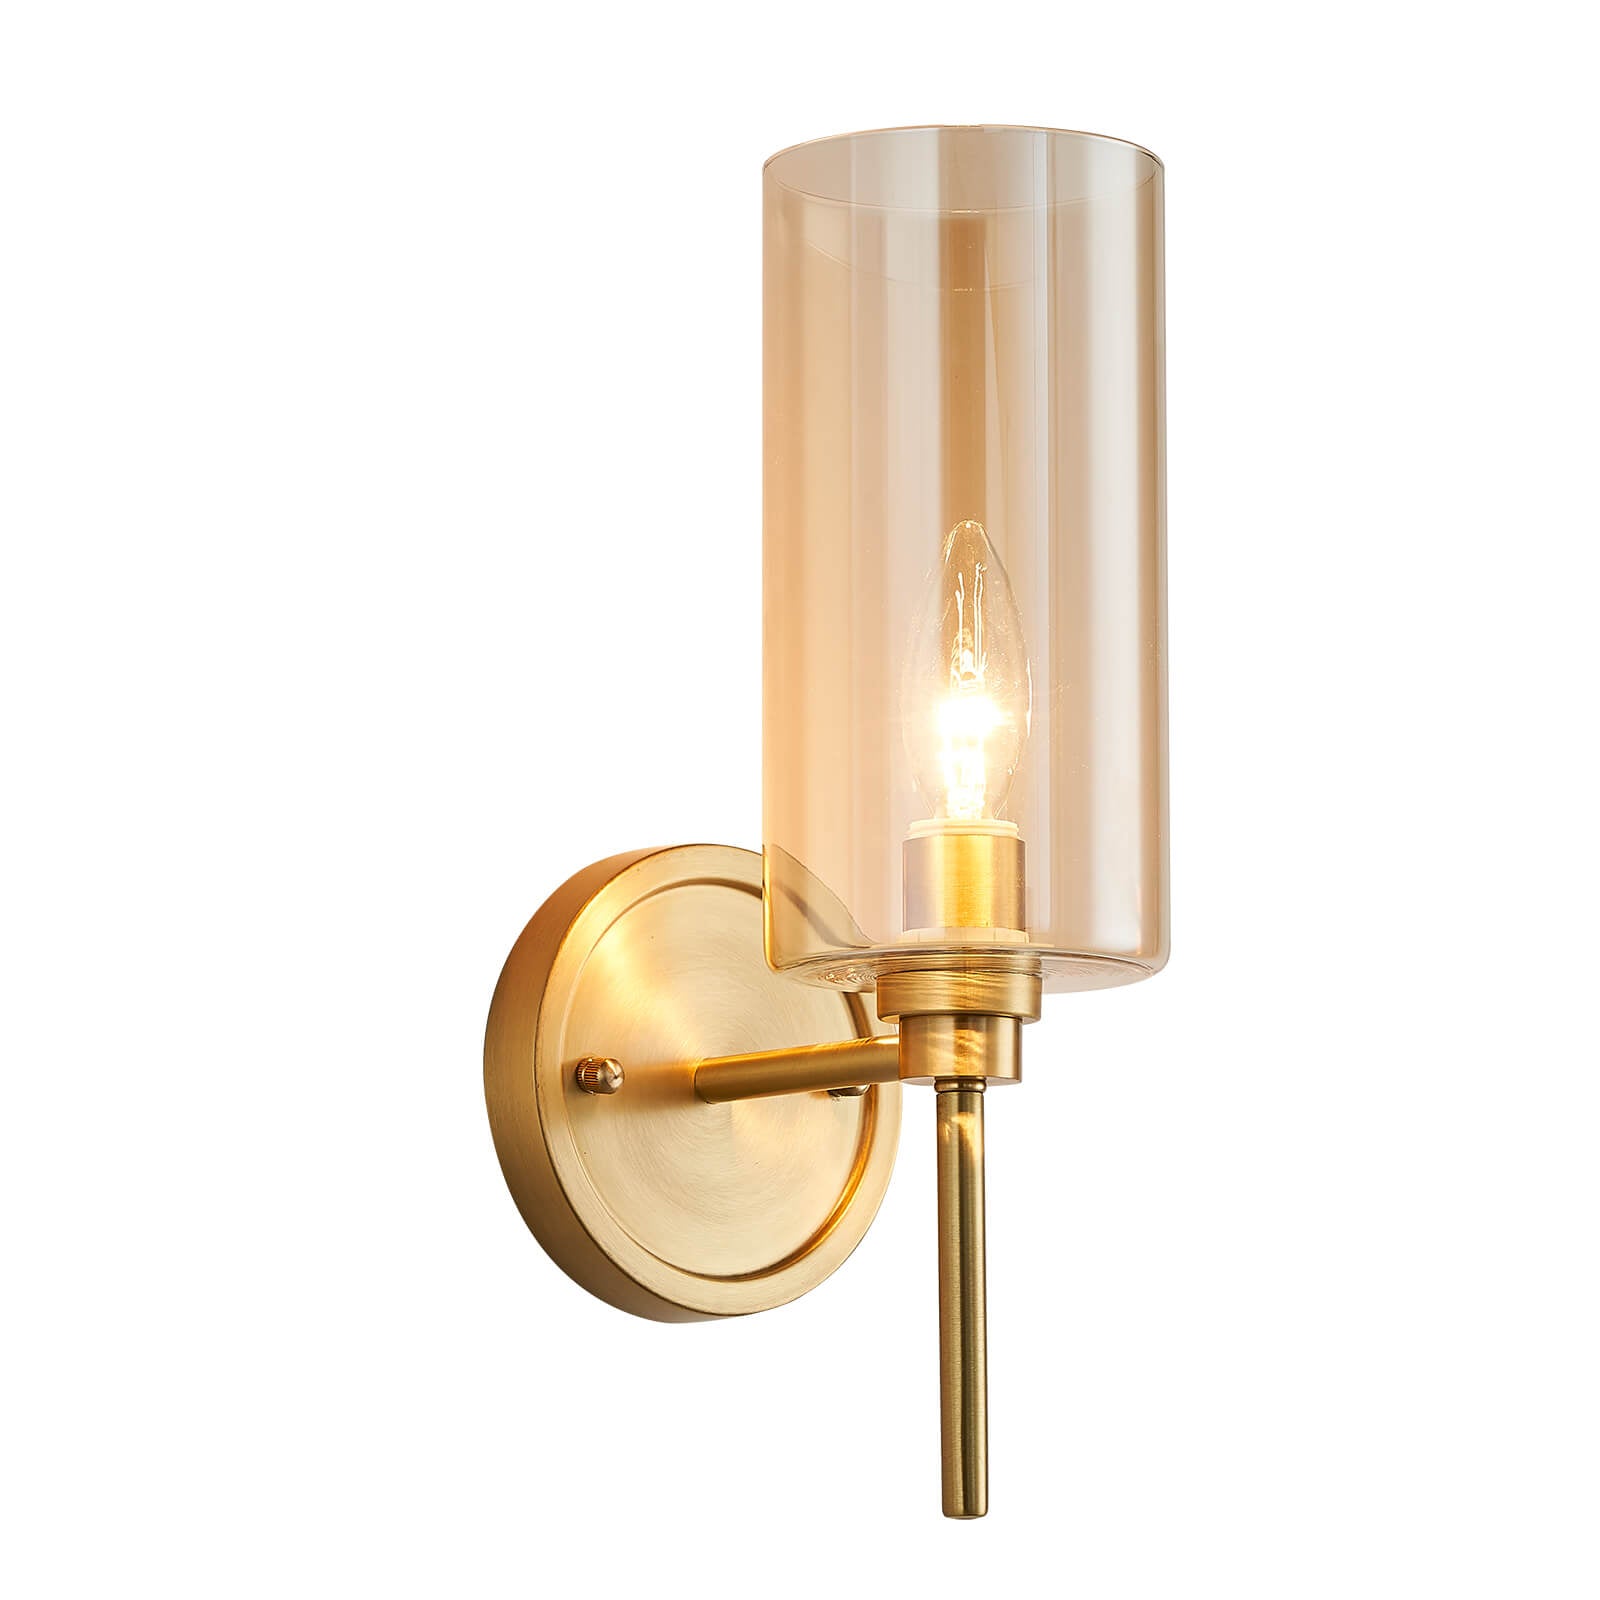 Cognac Color Glass Covered Copper Wall Lamp